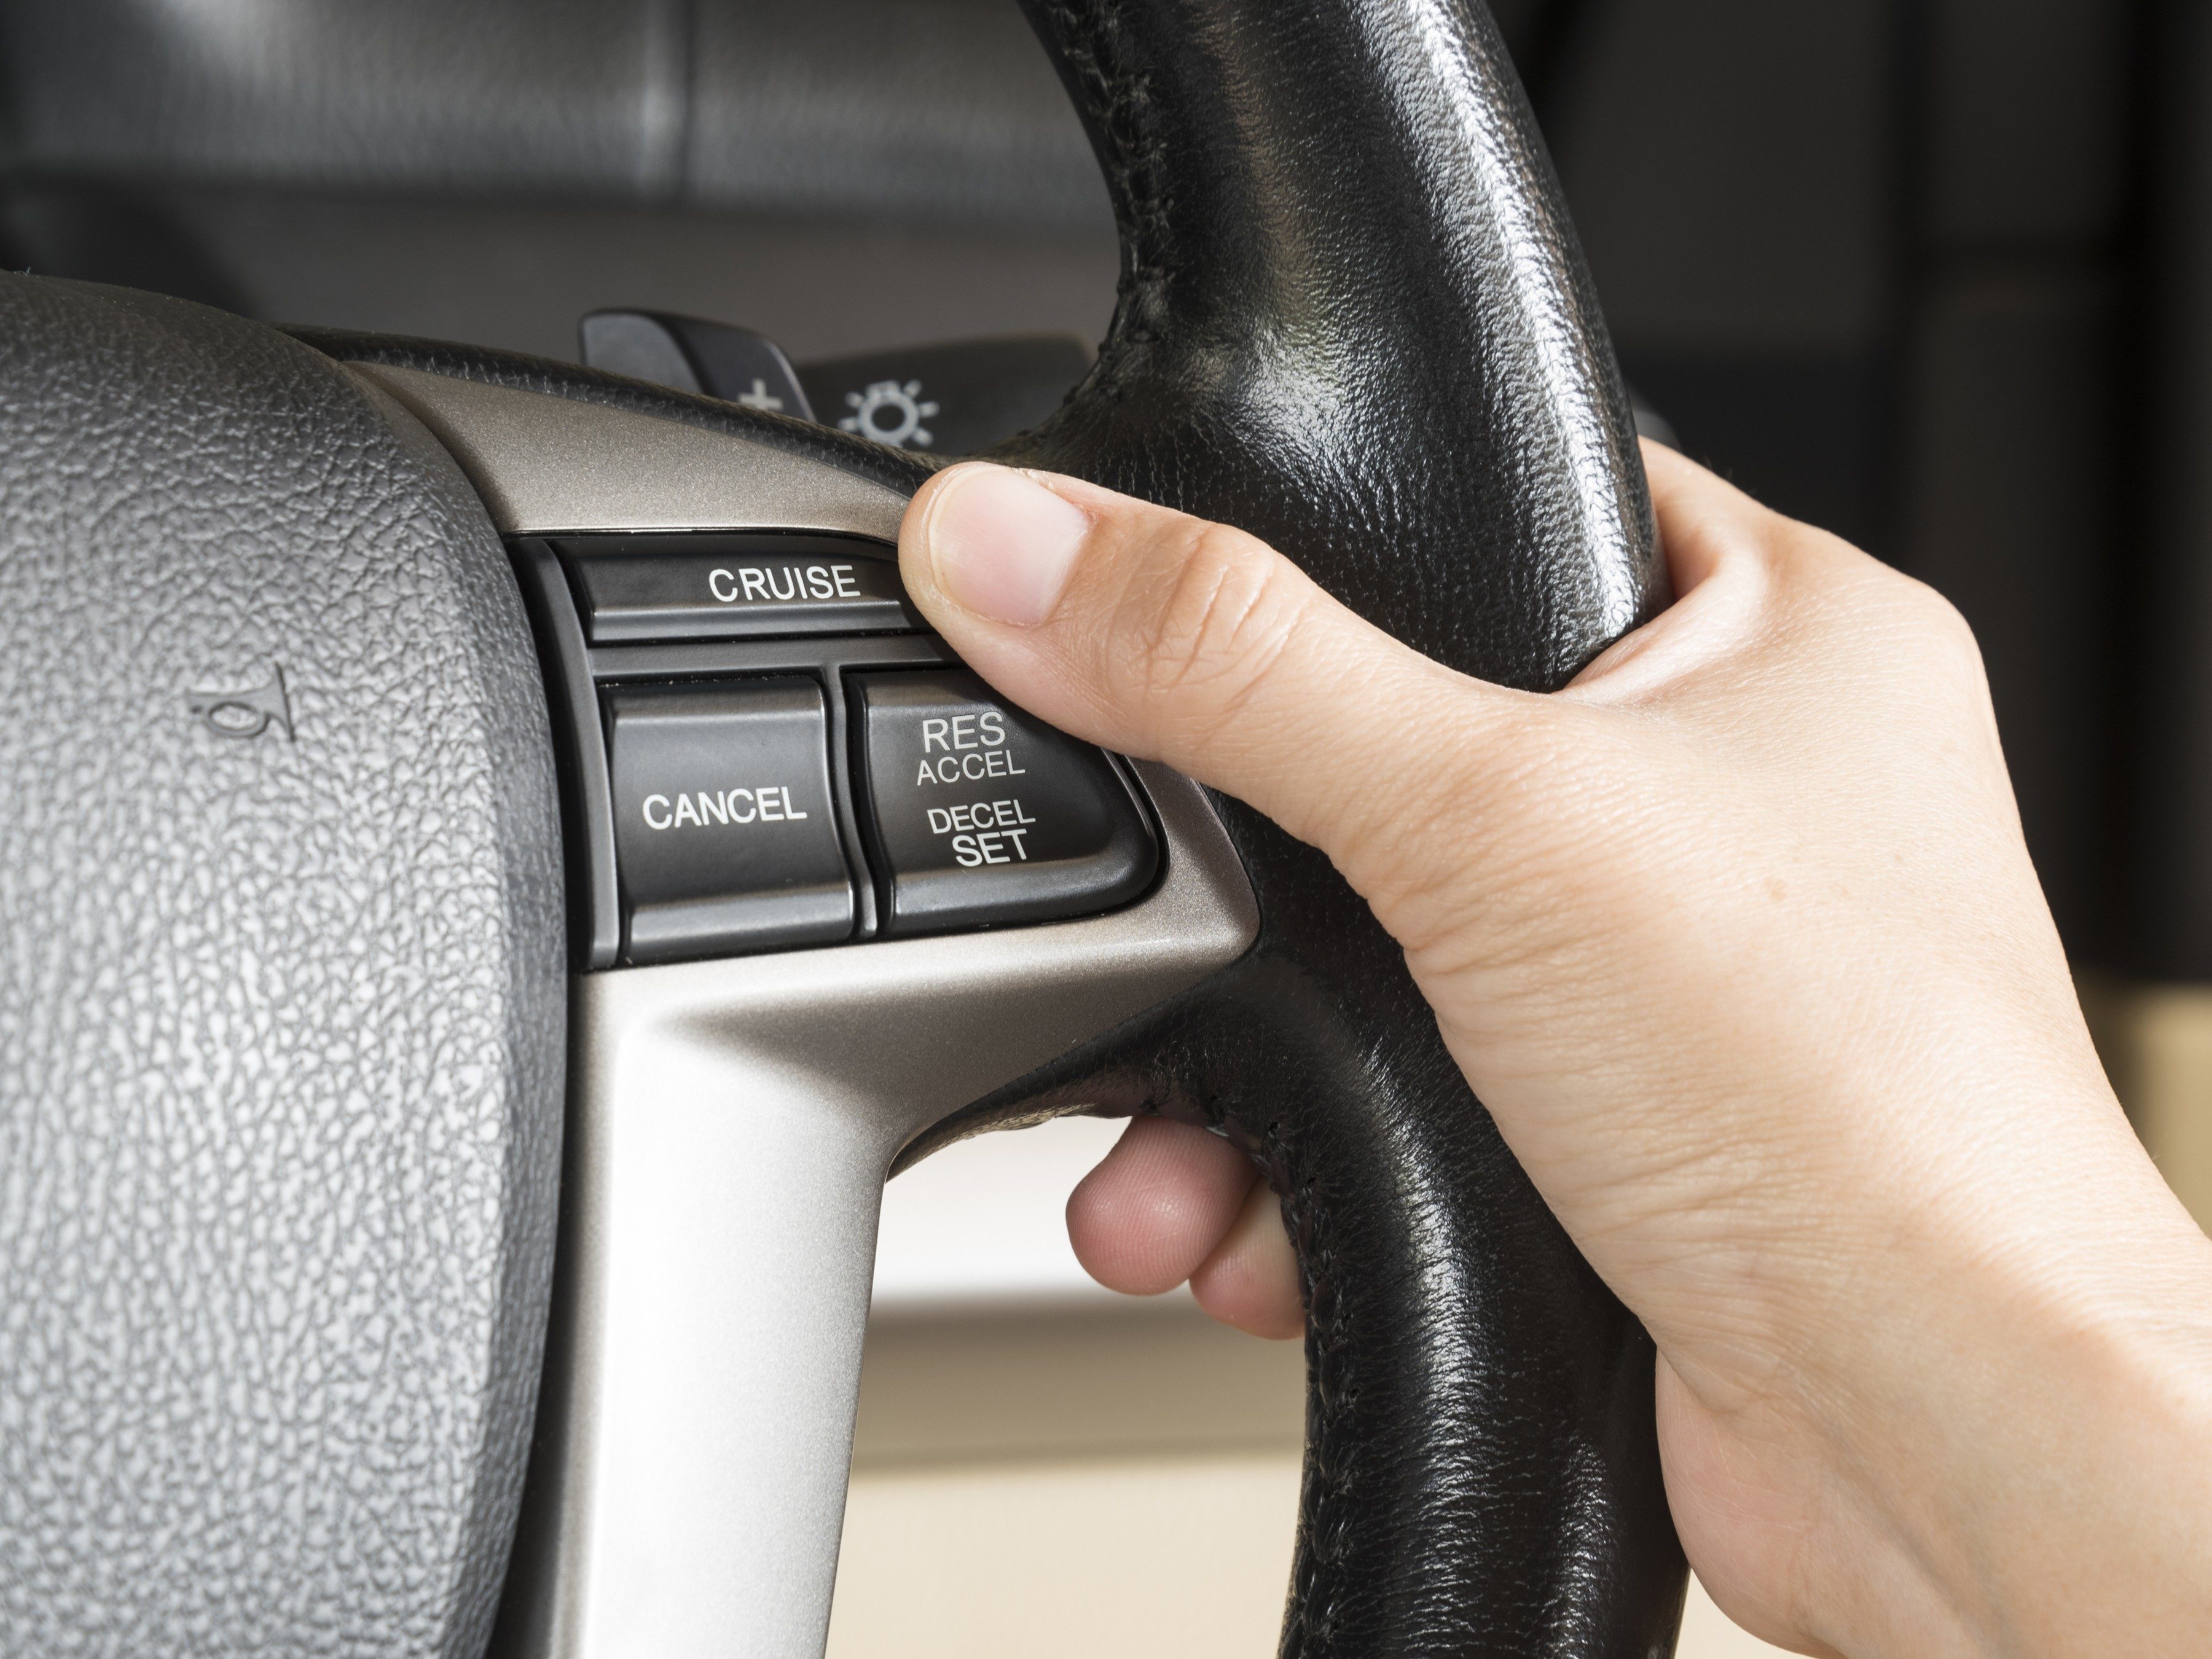 Driving tip #3: Use your car's cruise control to its full potential.